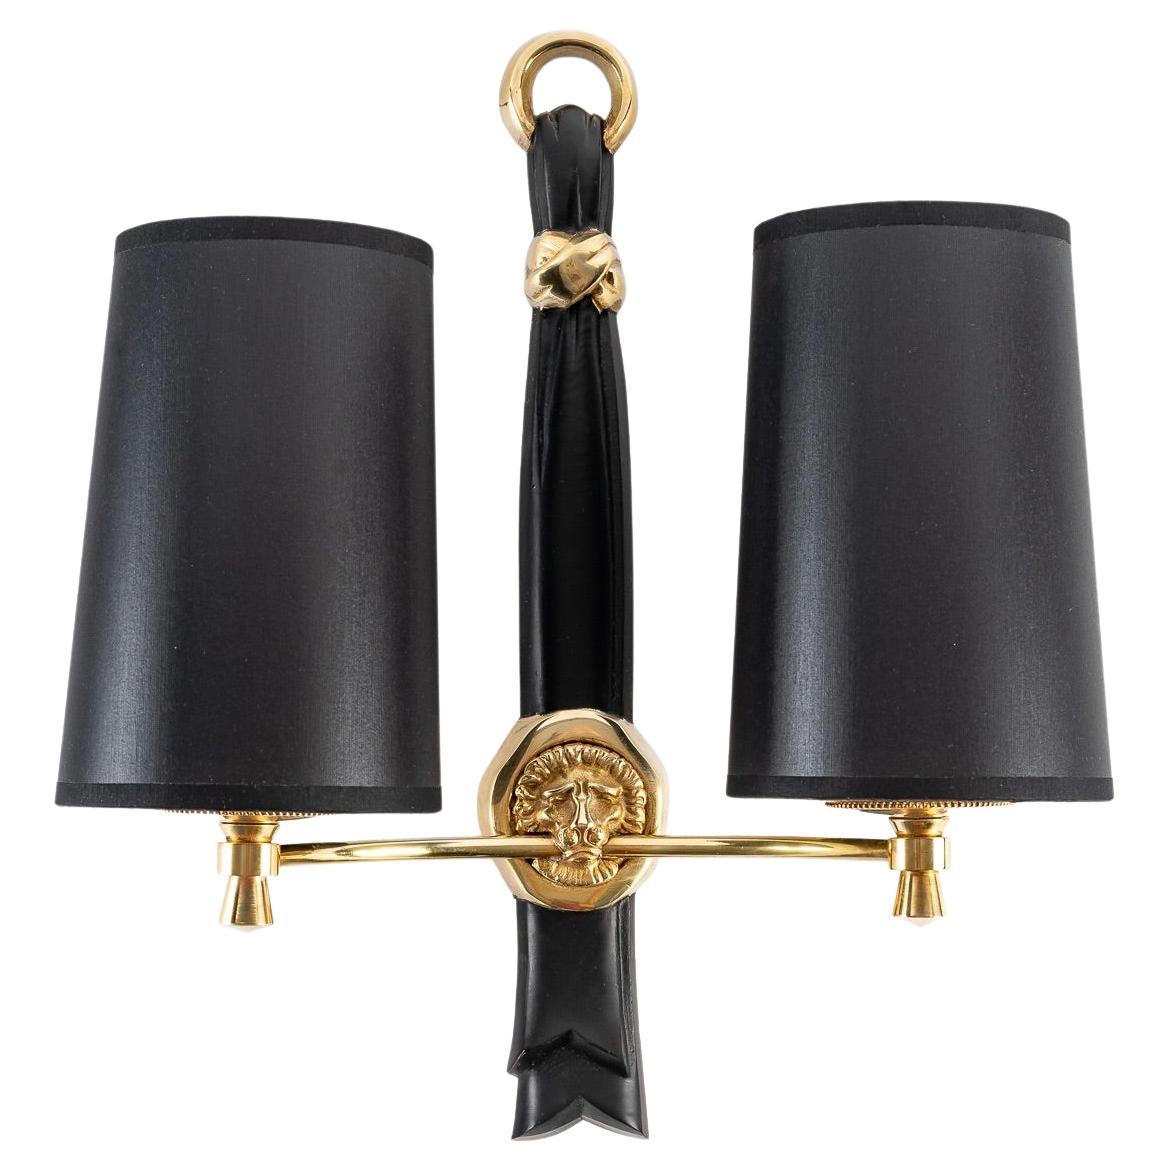 Pair of wall sconces with two lights in gilt bronze and black patina.
The central stem is composed of a draped ribbon with black patina passing through a gilded ring and held by a gilded bow. 
On the lower part, a gilded lion's head is decorated